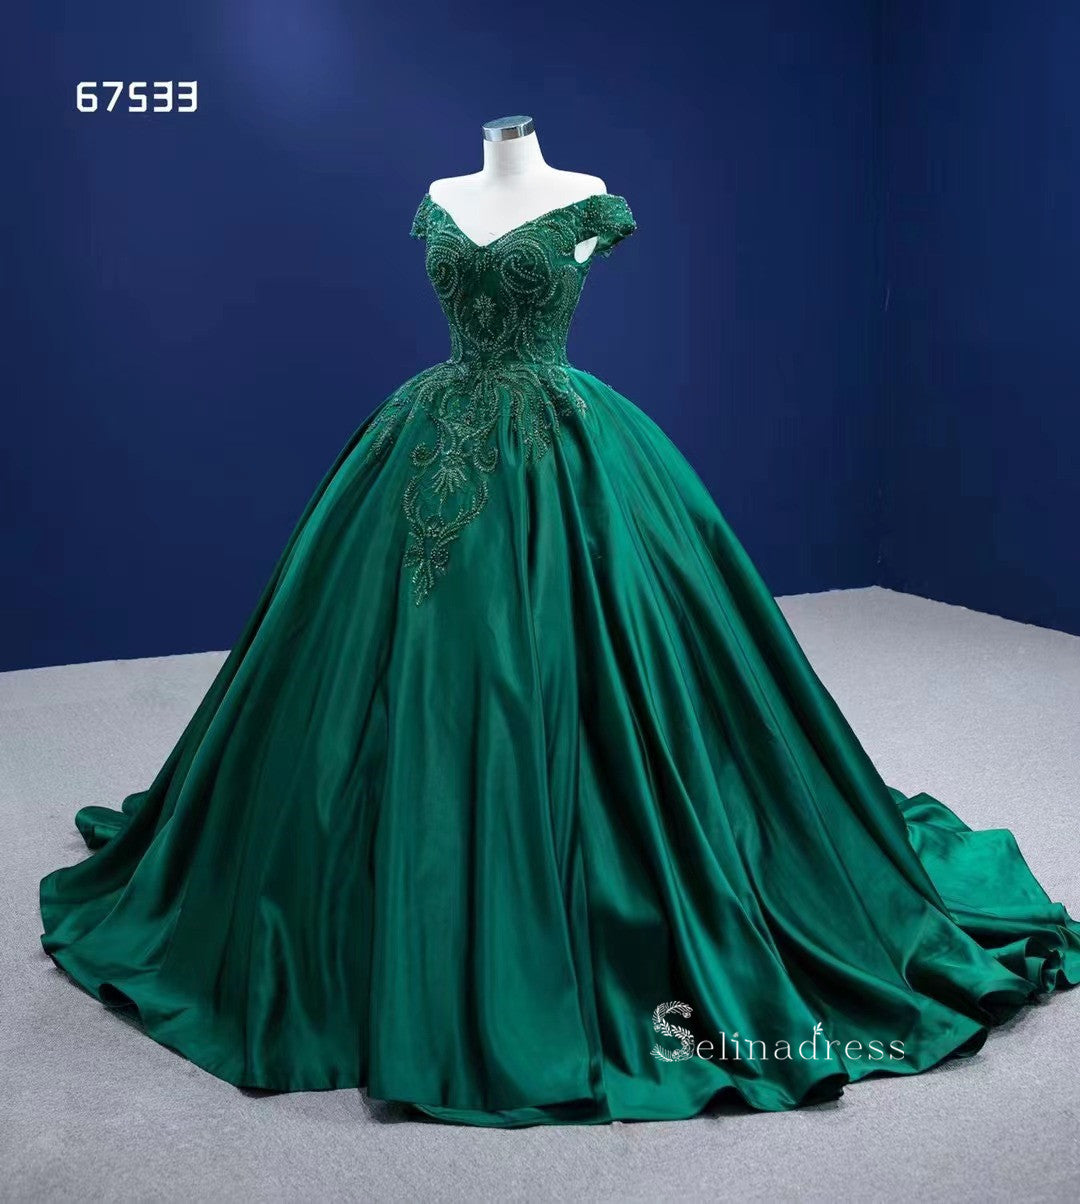 Sparkly Green Ball Gowns Gold Lace Appliqued Wedding Dresses with Slee –  Viniodress